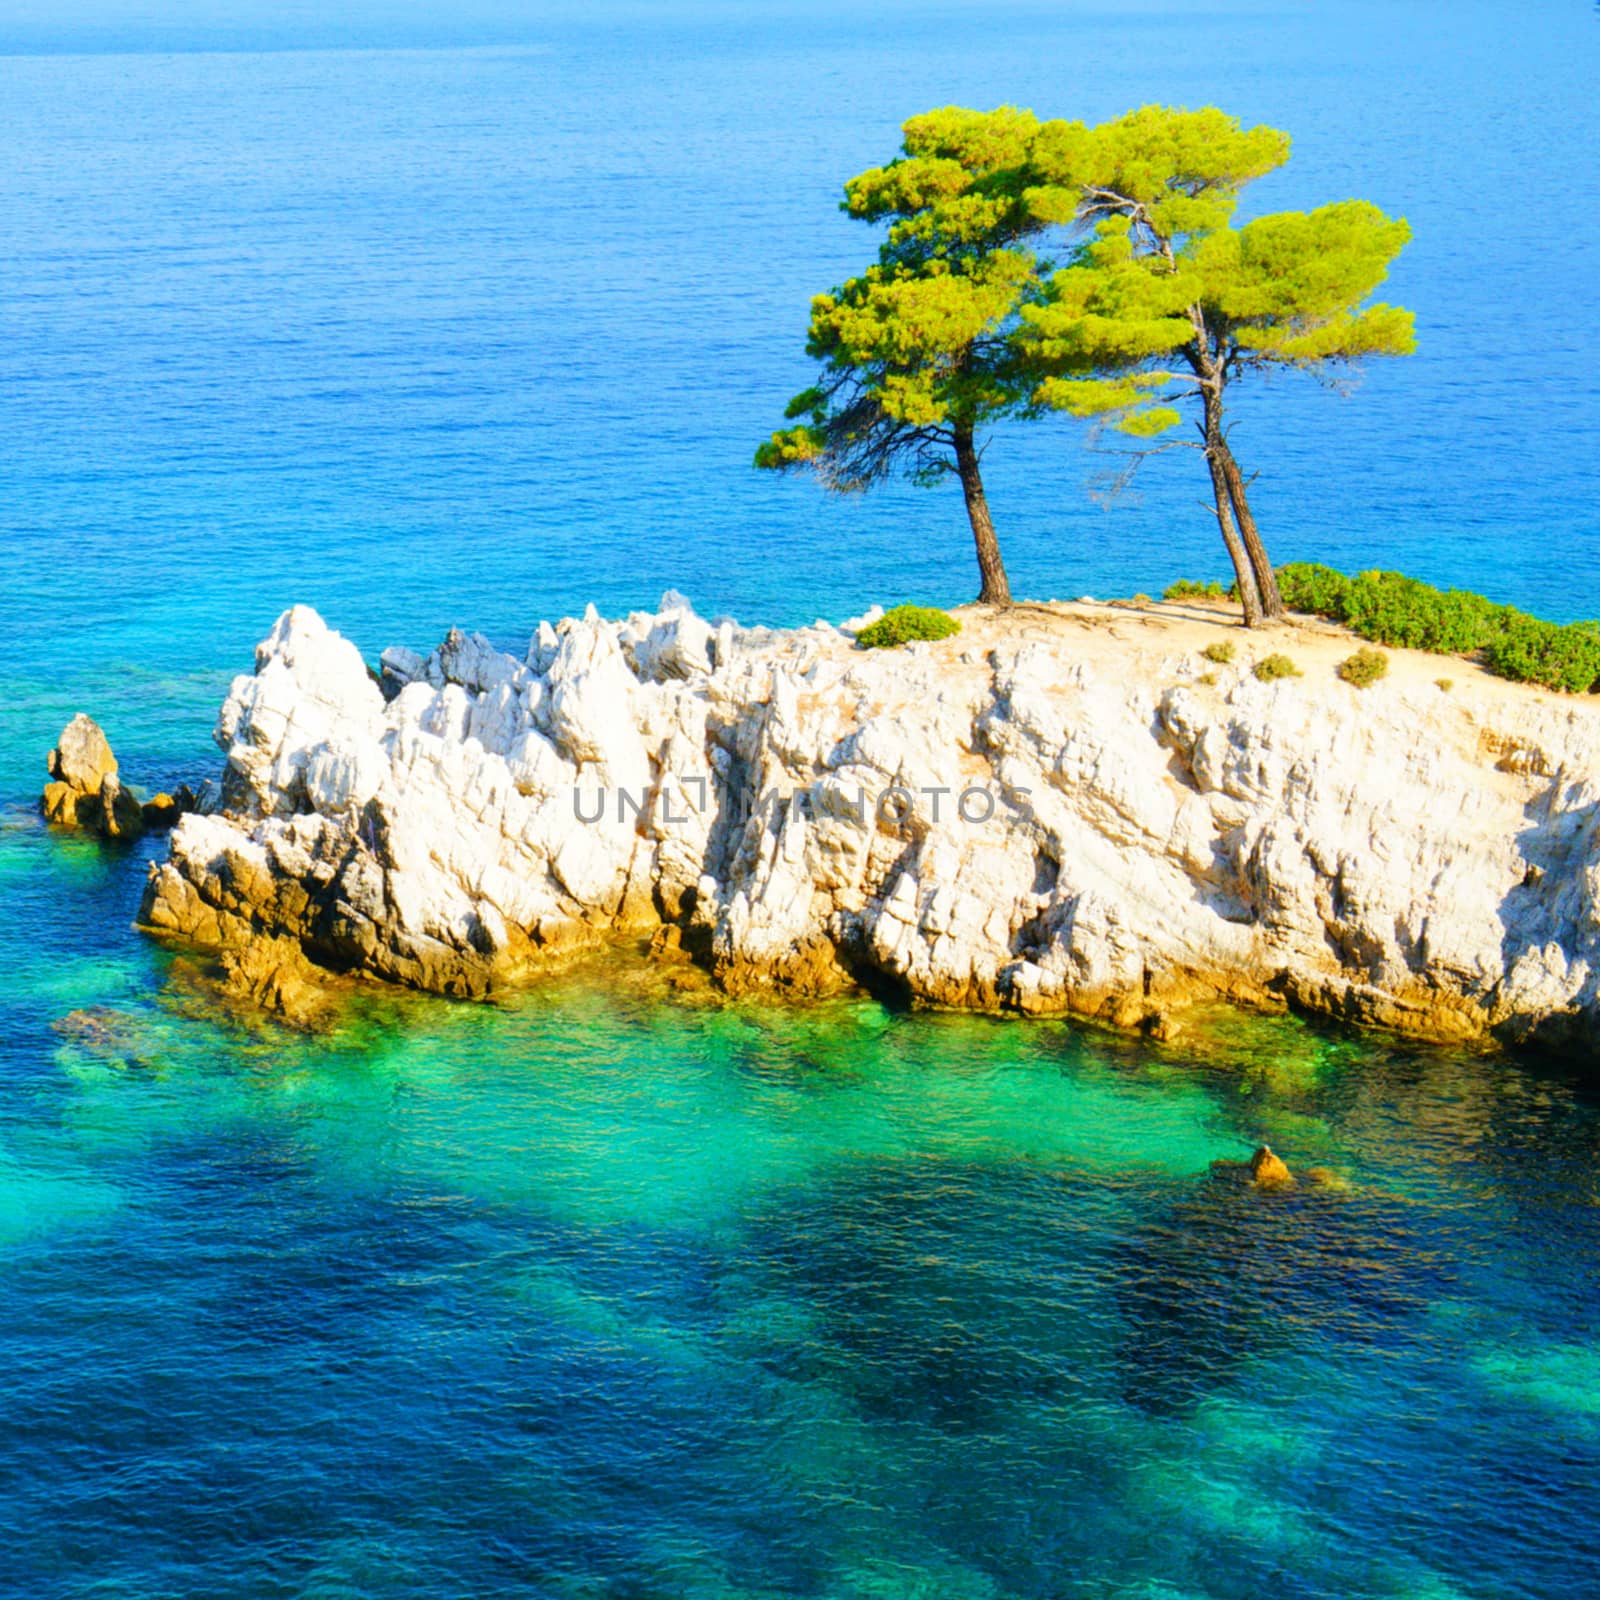 turquoise water, pine trees and rocky coastline of Skopelos, Greece by Jindrich_Blecha